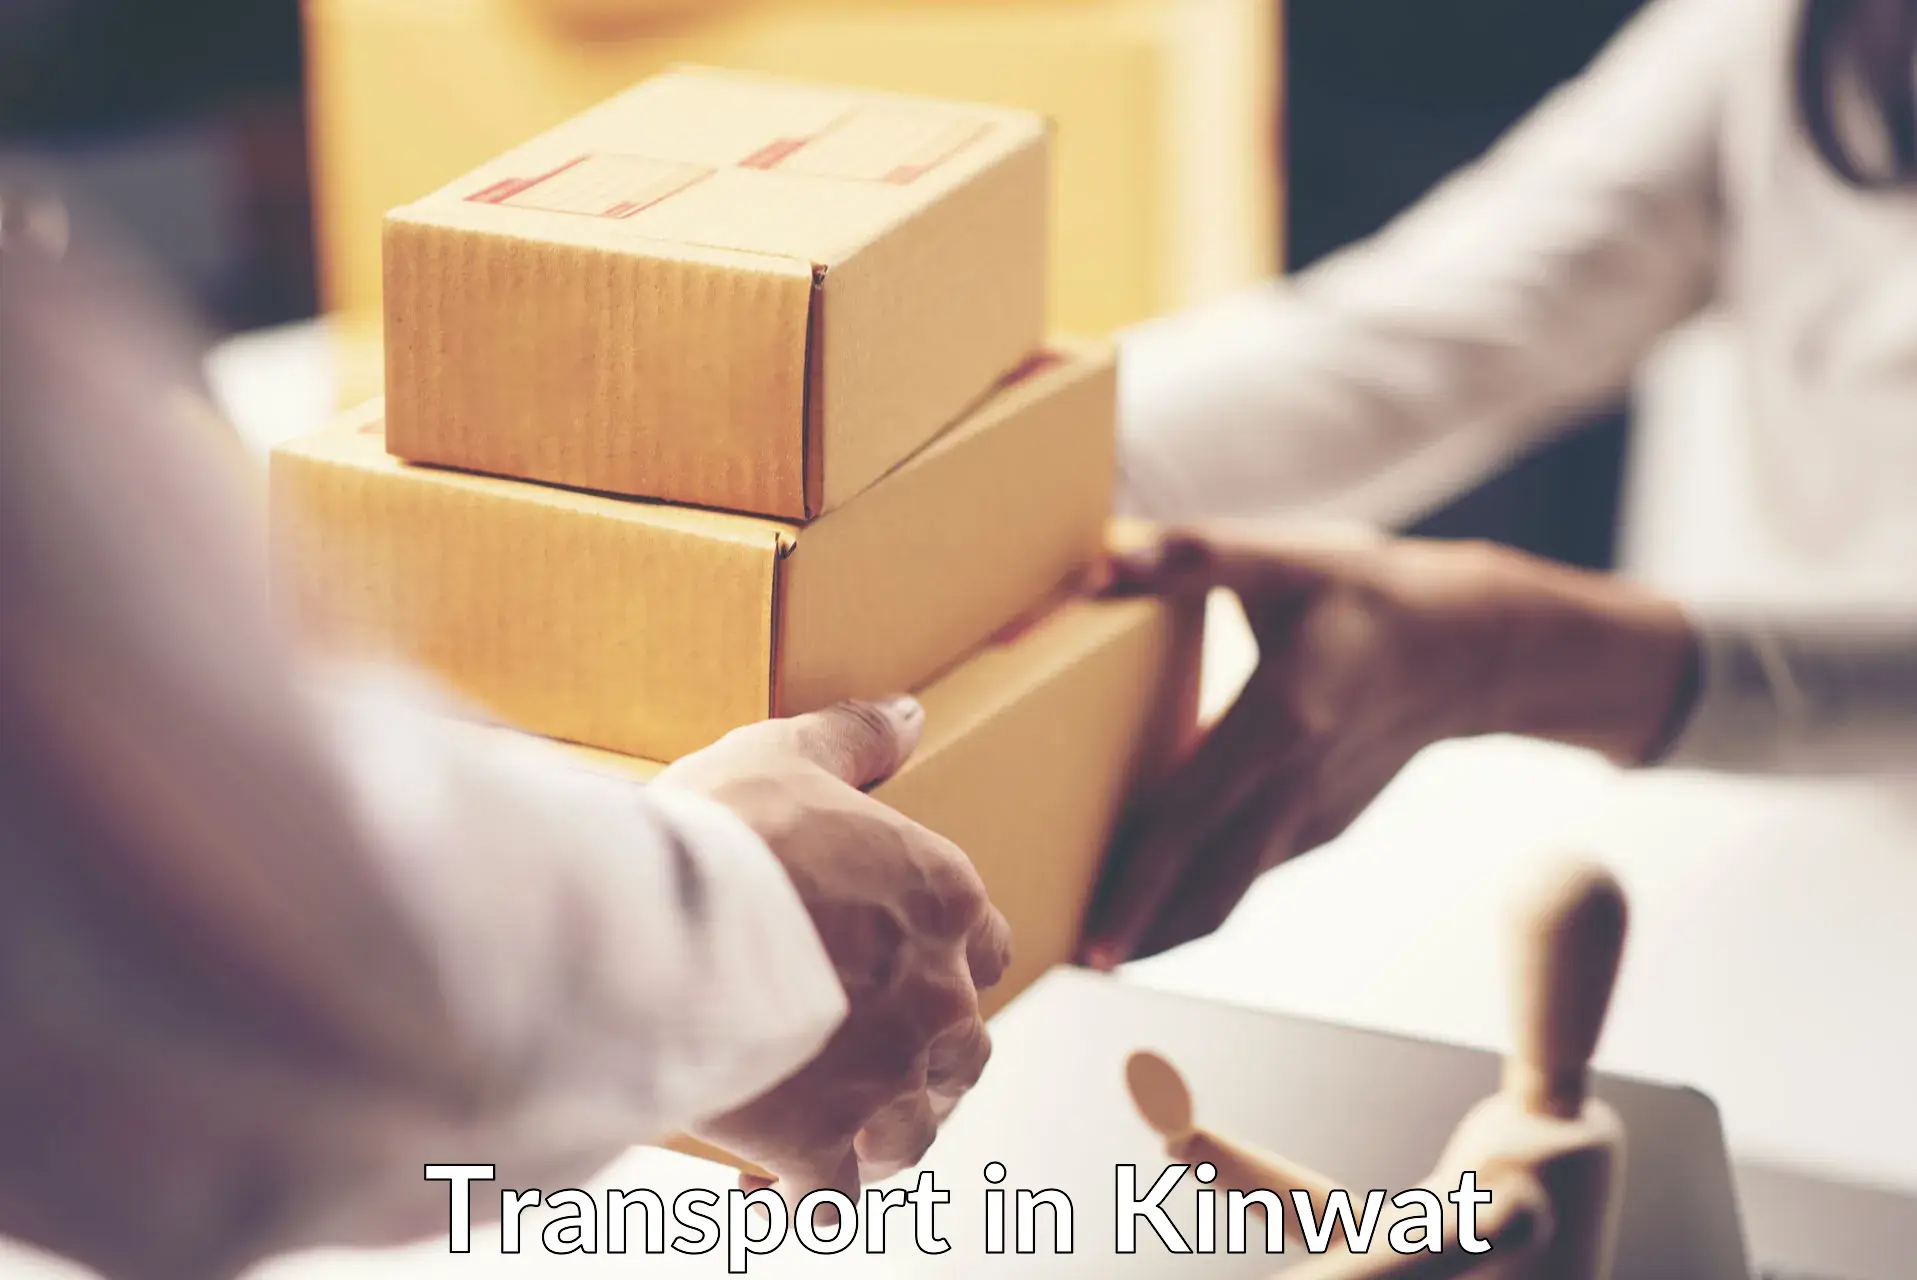 Road transport online services in Kinwat